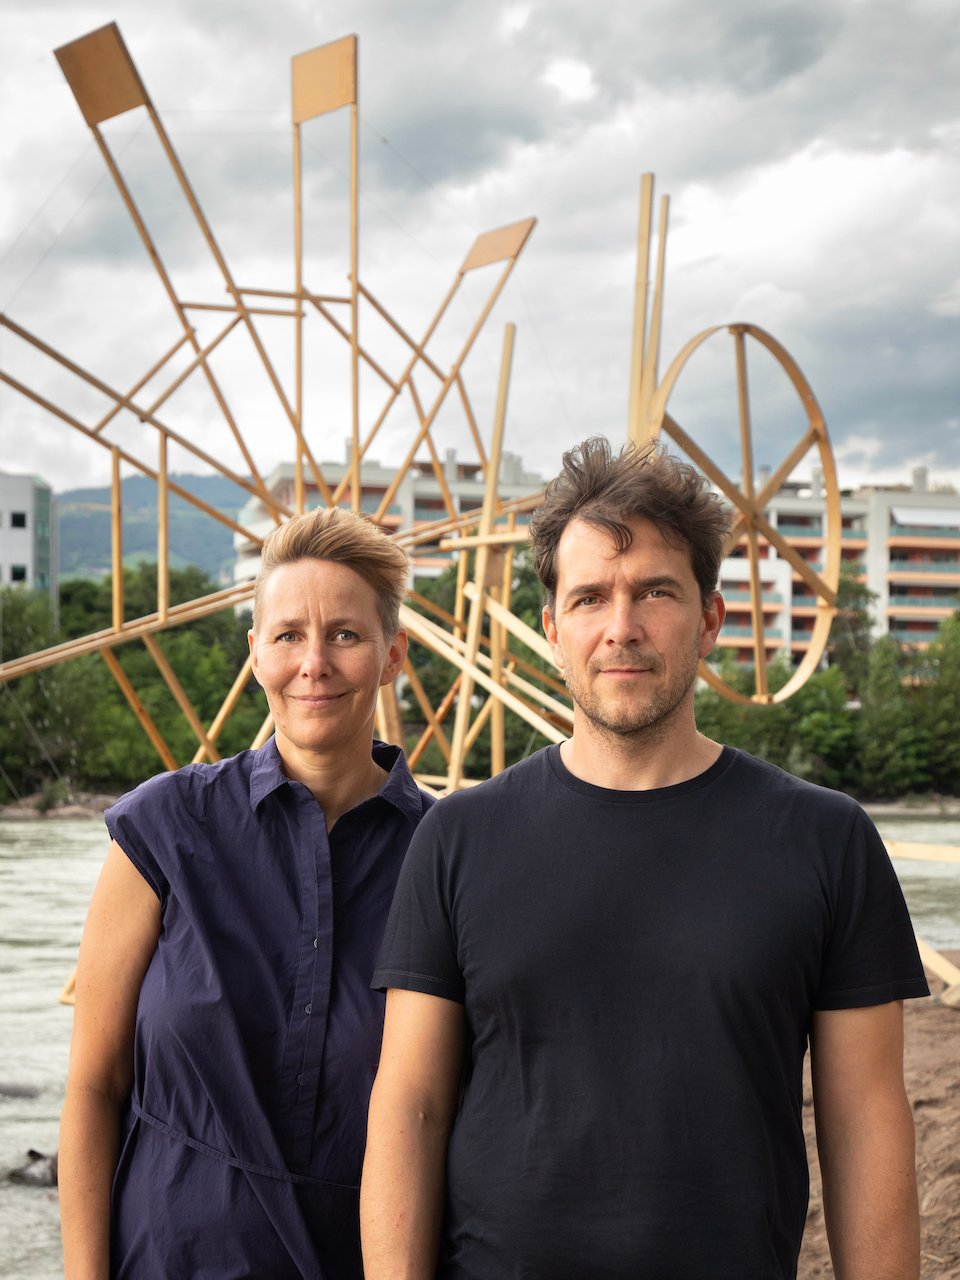 Twenty years of Lungomare in Bolzano: Interview with the founders